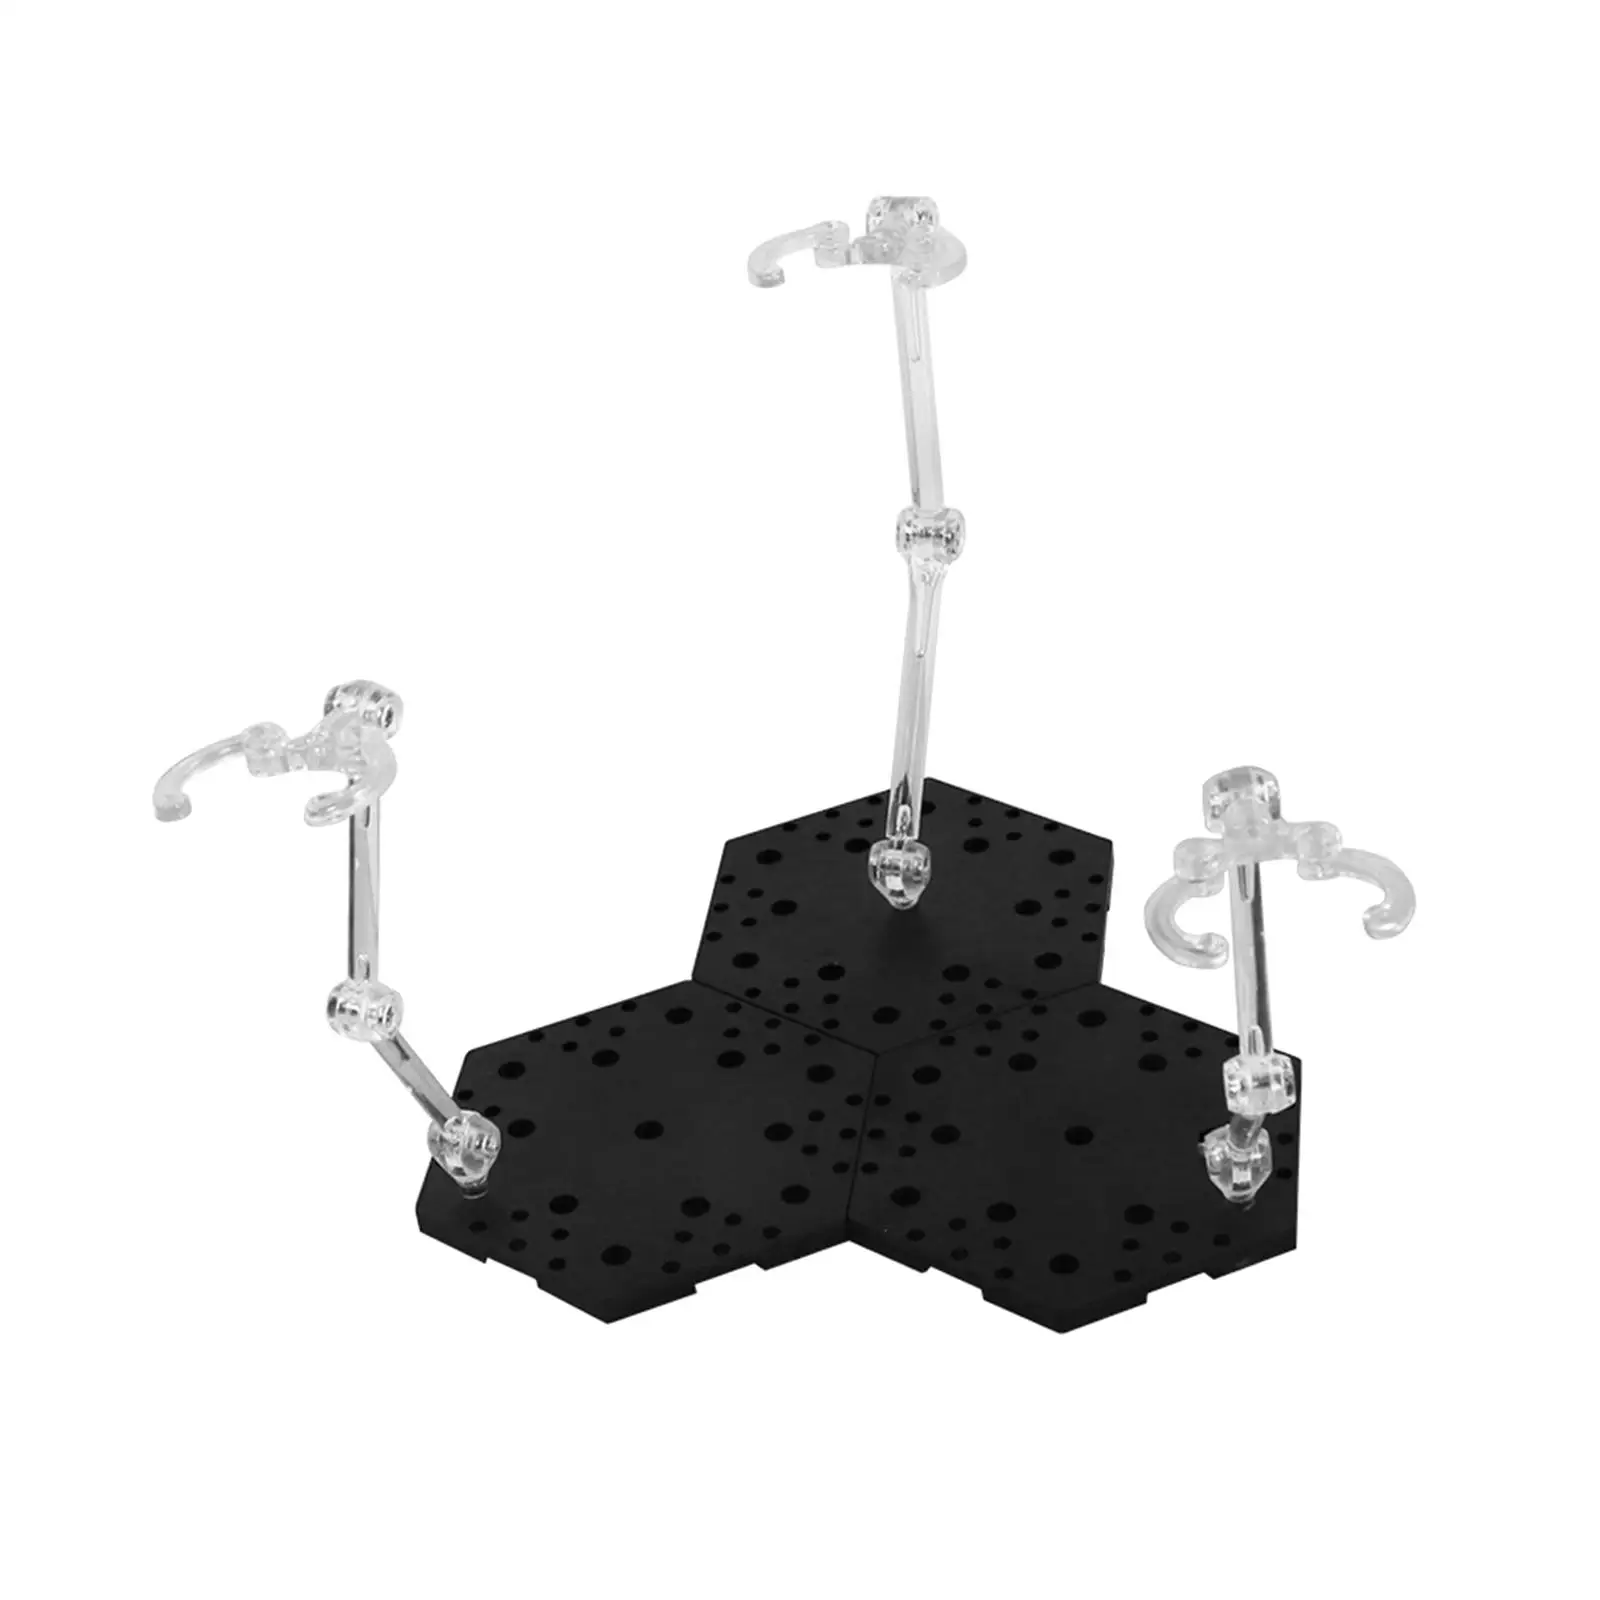 Sturdy Action Figure Base Support Rack Stand Bracket Holder for Doll Model Toys DIY Accessories